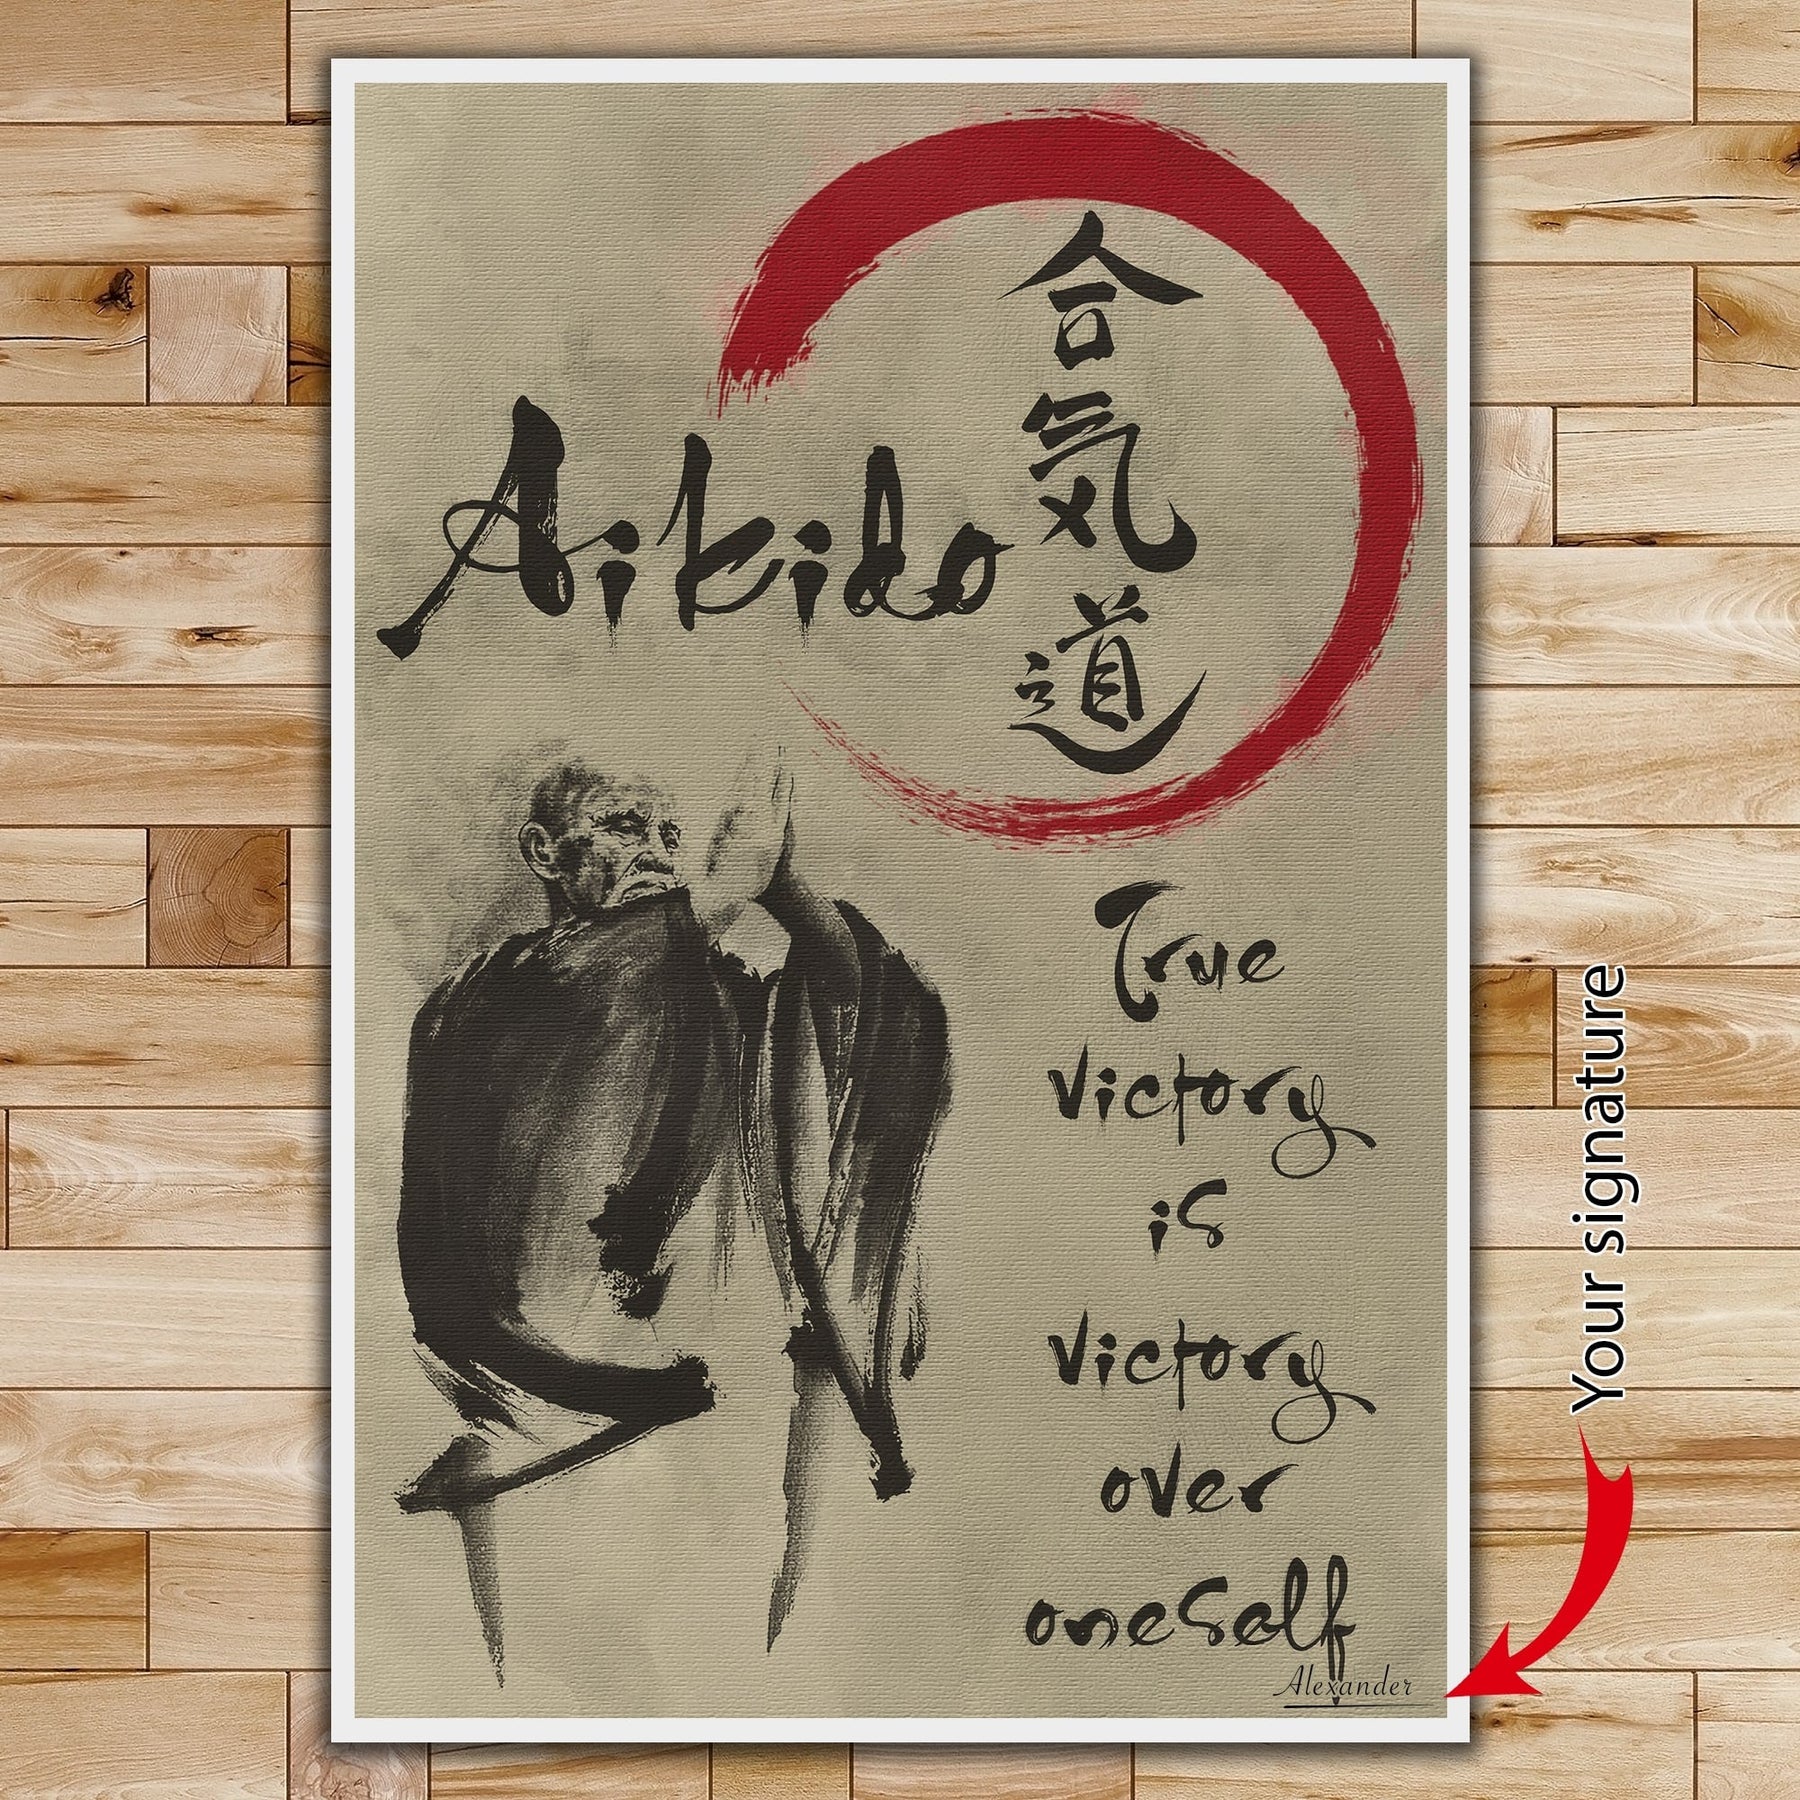 AI008 - True Victory Is Victory Over Oneself - Morihei Ueshiba - Vertical Poster - Vertical Canvas - Aikido Poster